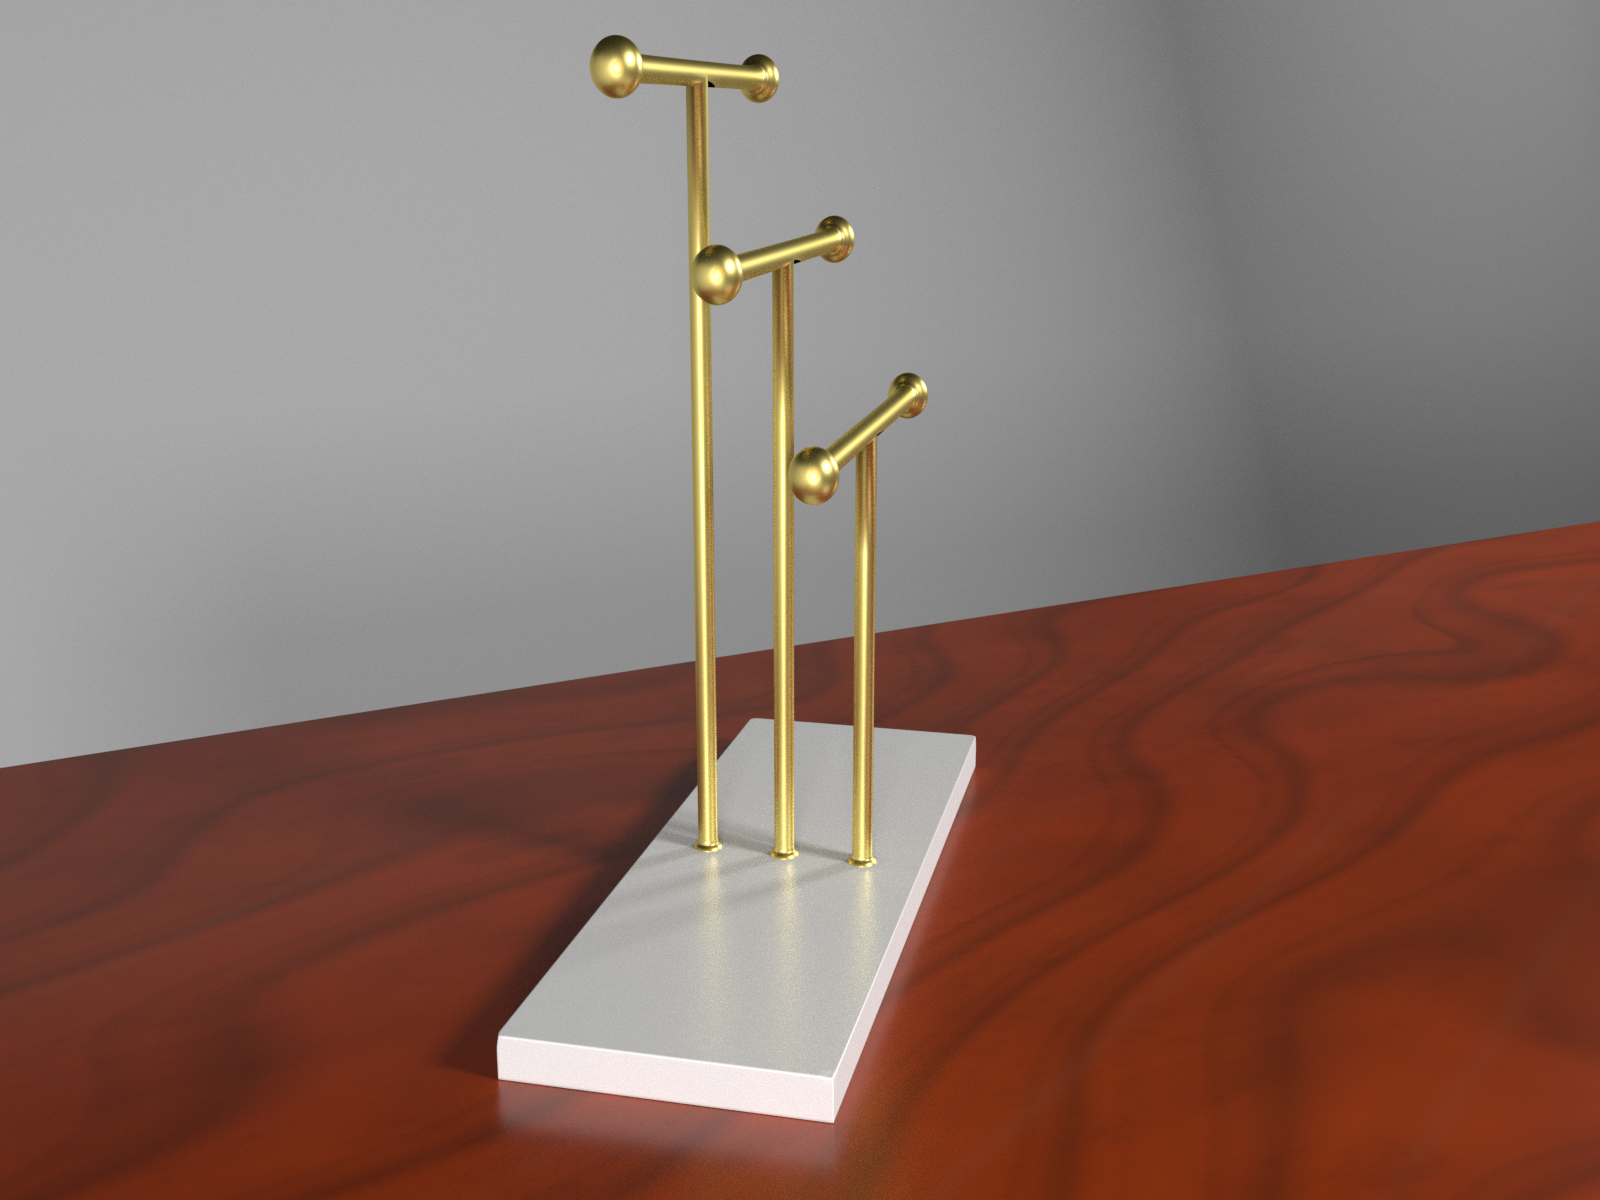 Golden jewelry holder on mahogany desk preview image 2